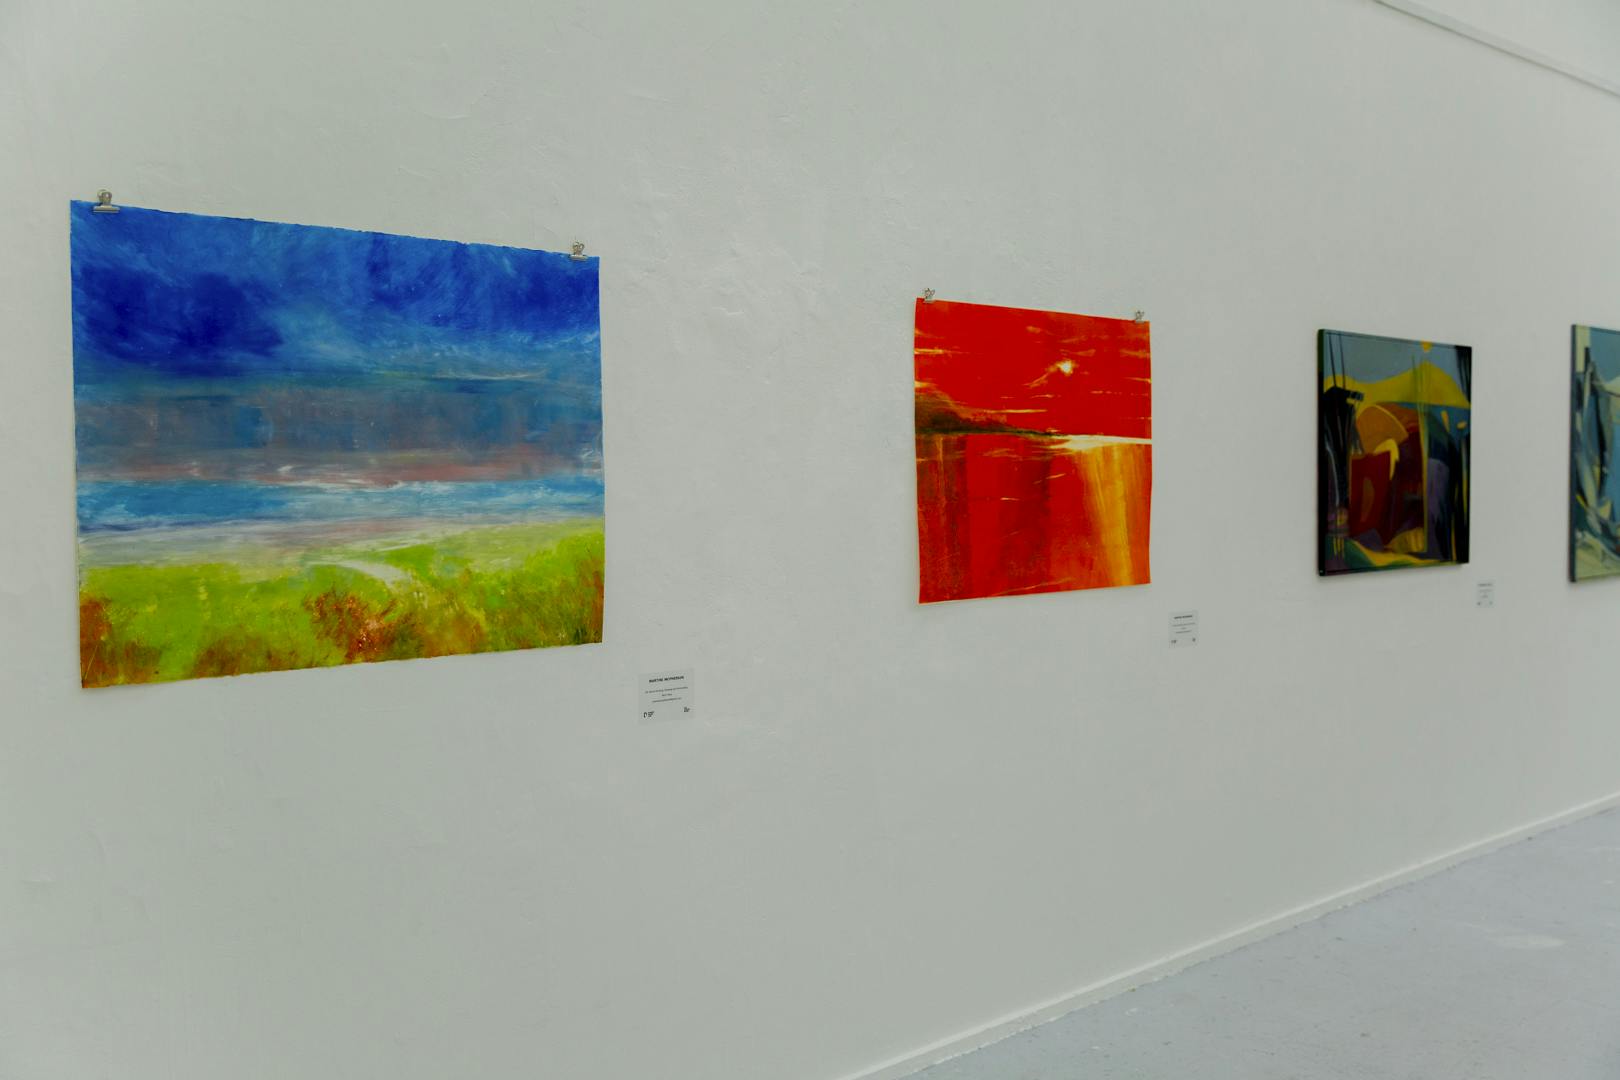 An image of Martine's exhibition featuring a number of colourful paintings